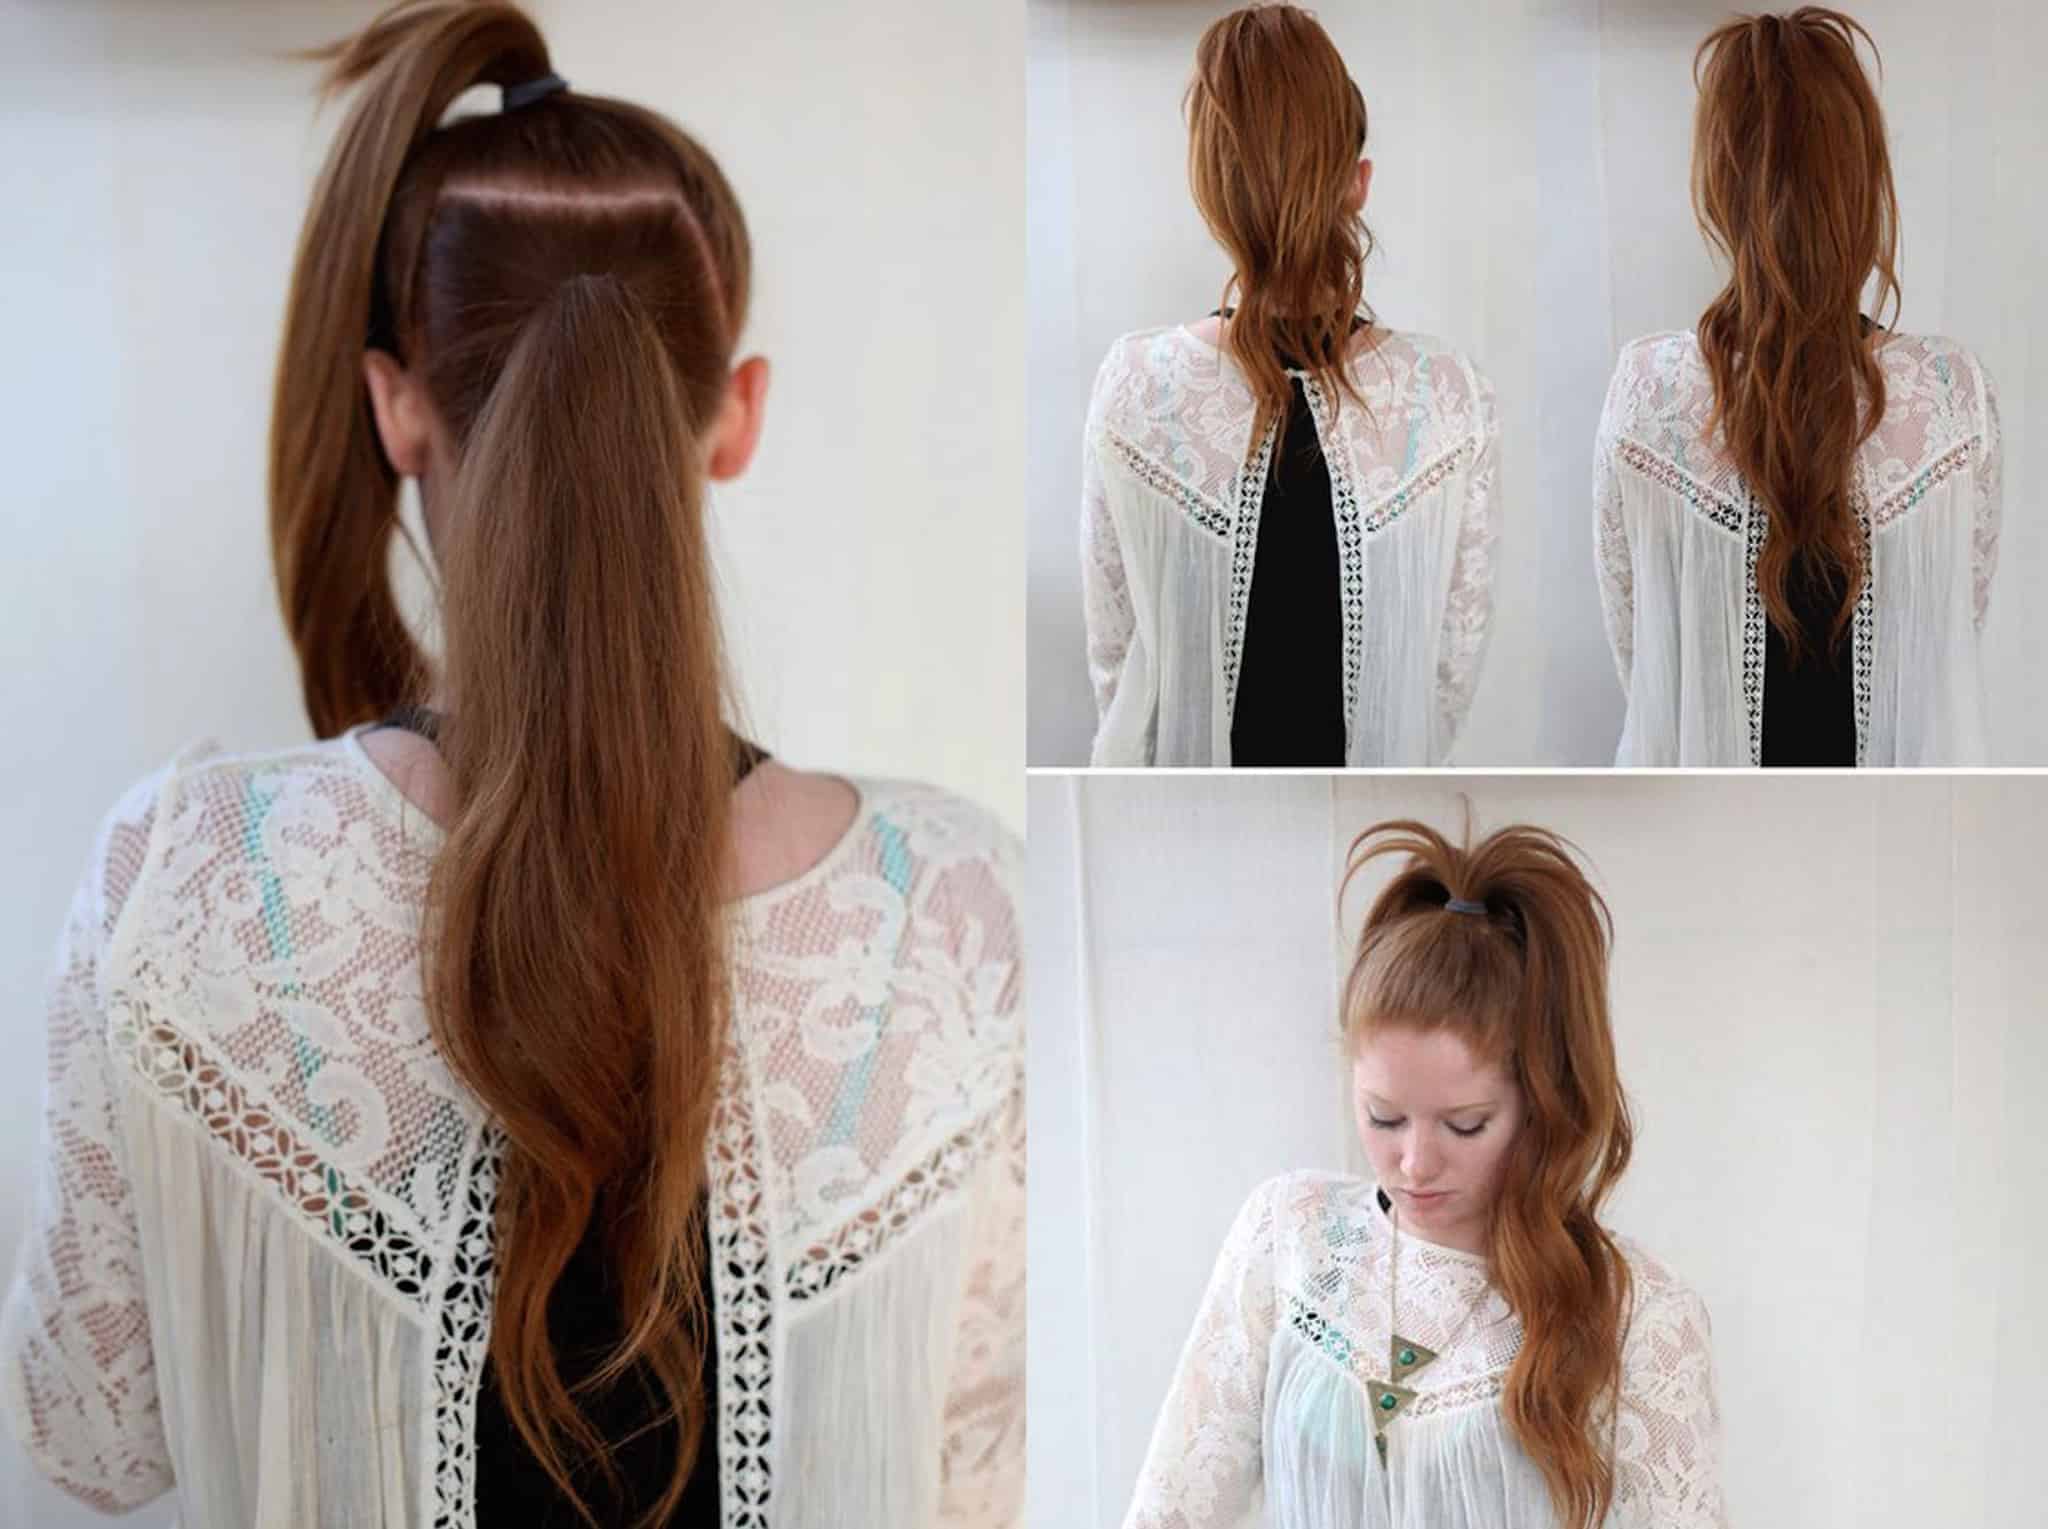 21 Perfect Ponytail Hairstyles for Girls for Any Event (New Styles Added)